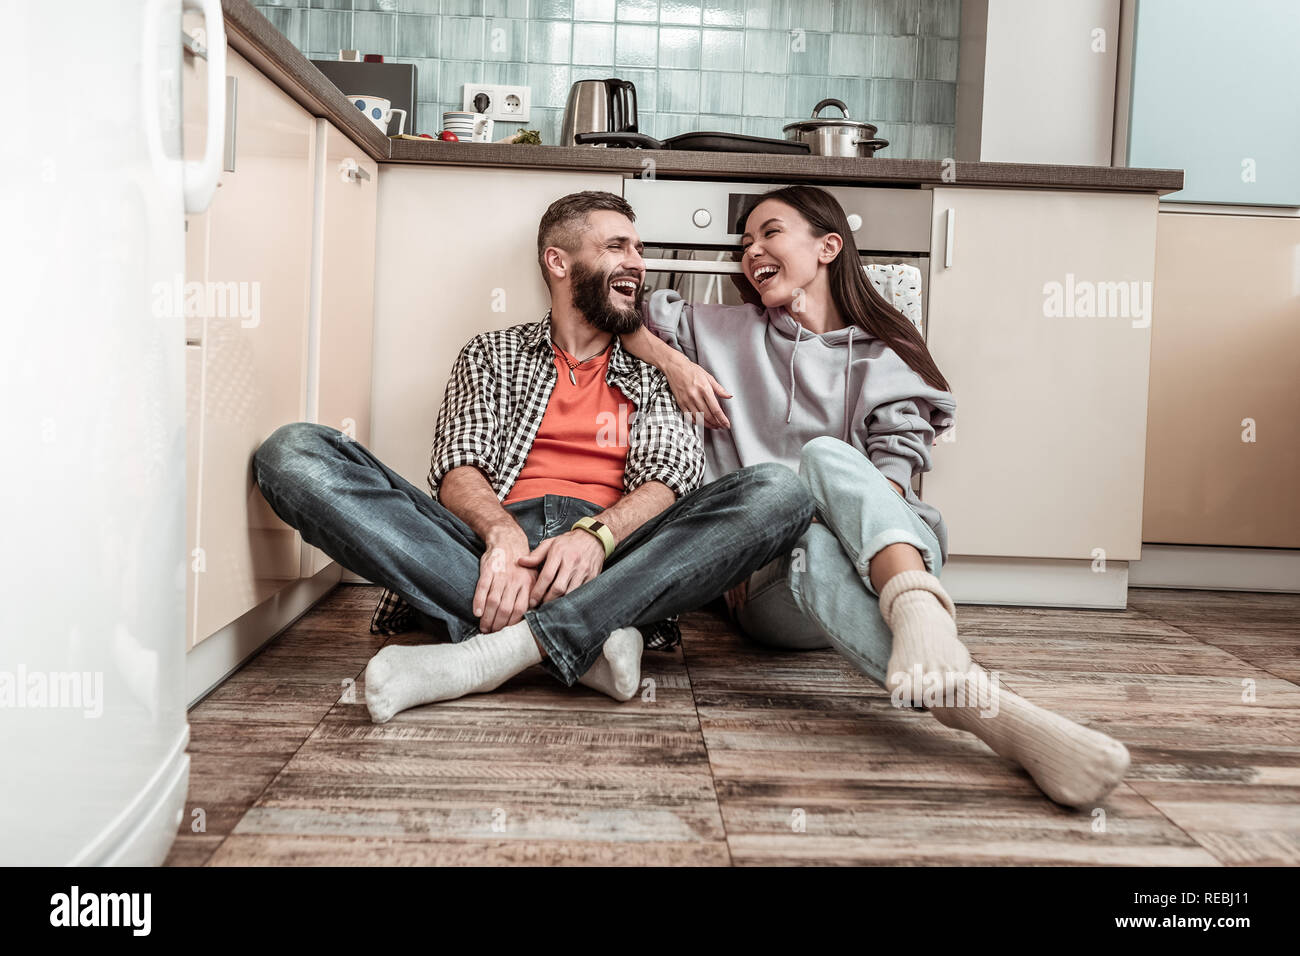 Just married couple feeling extremely happy spending day together Stock Photo